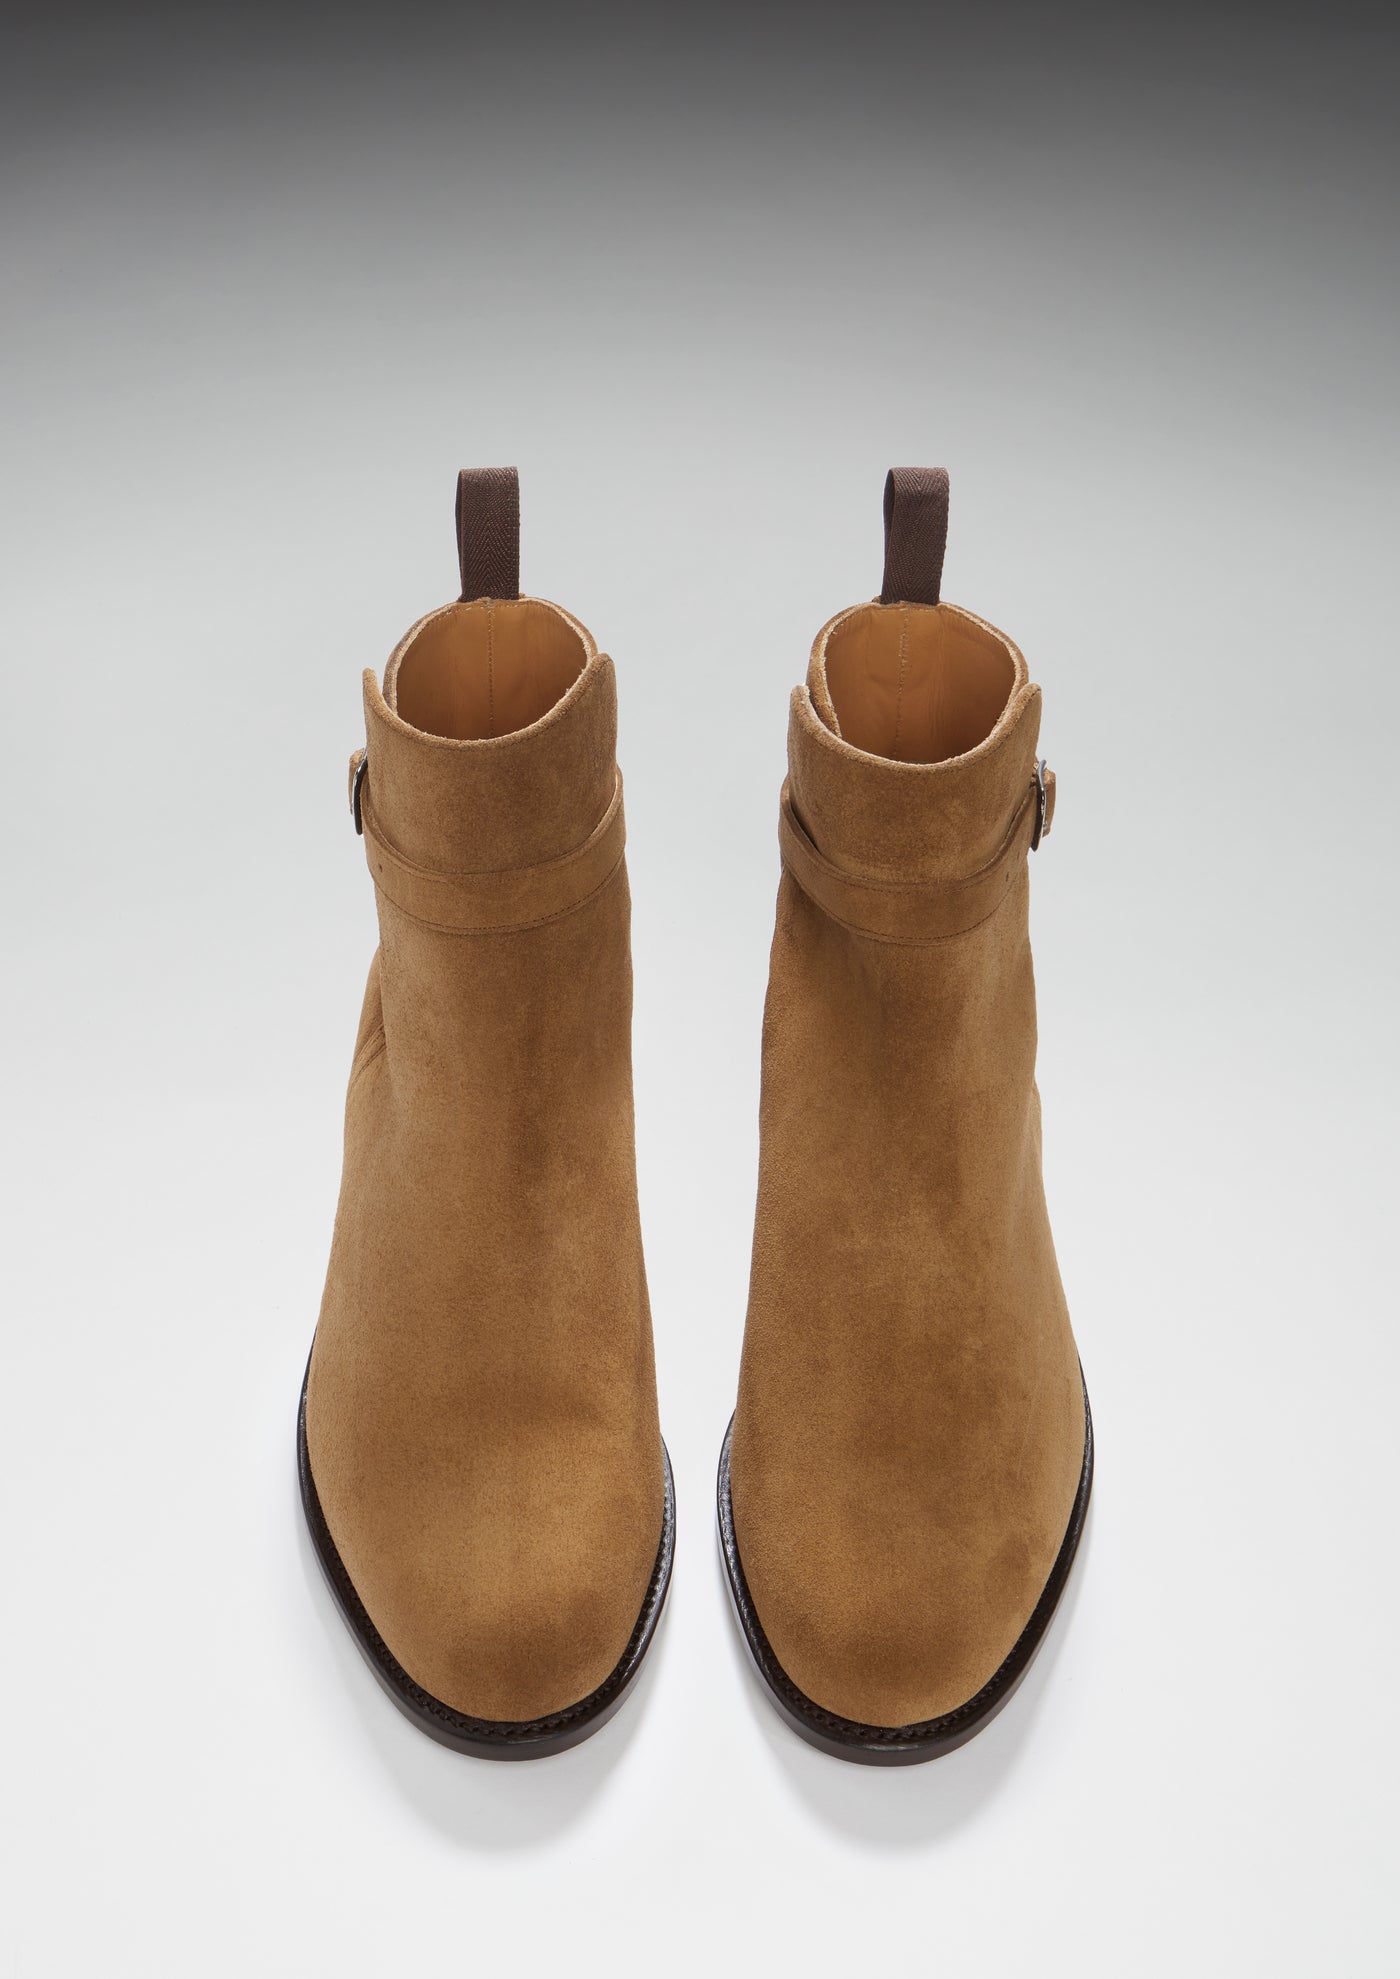 Tobacco Suede Jodhpur Boots, Welted Leather Sole - Hugs & Co.